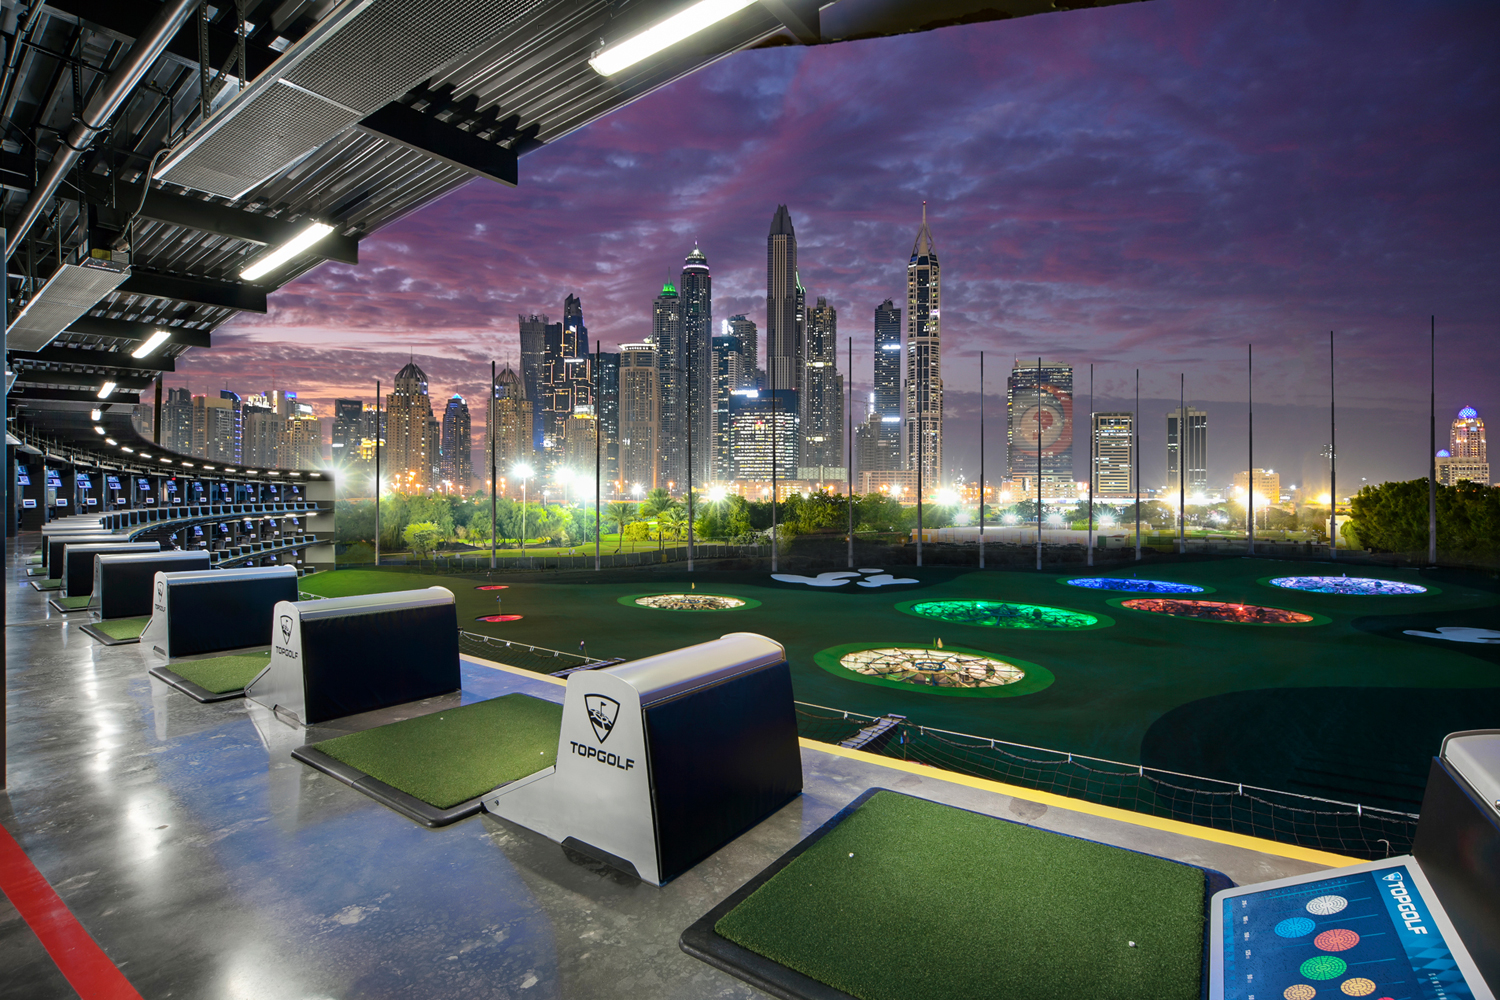 Why everyone needs to pay a visit to Topgolf Dubai | Time Out Dubai